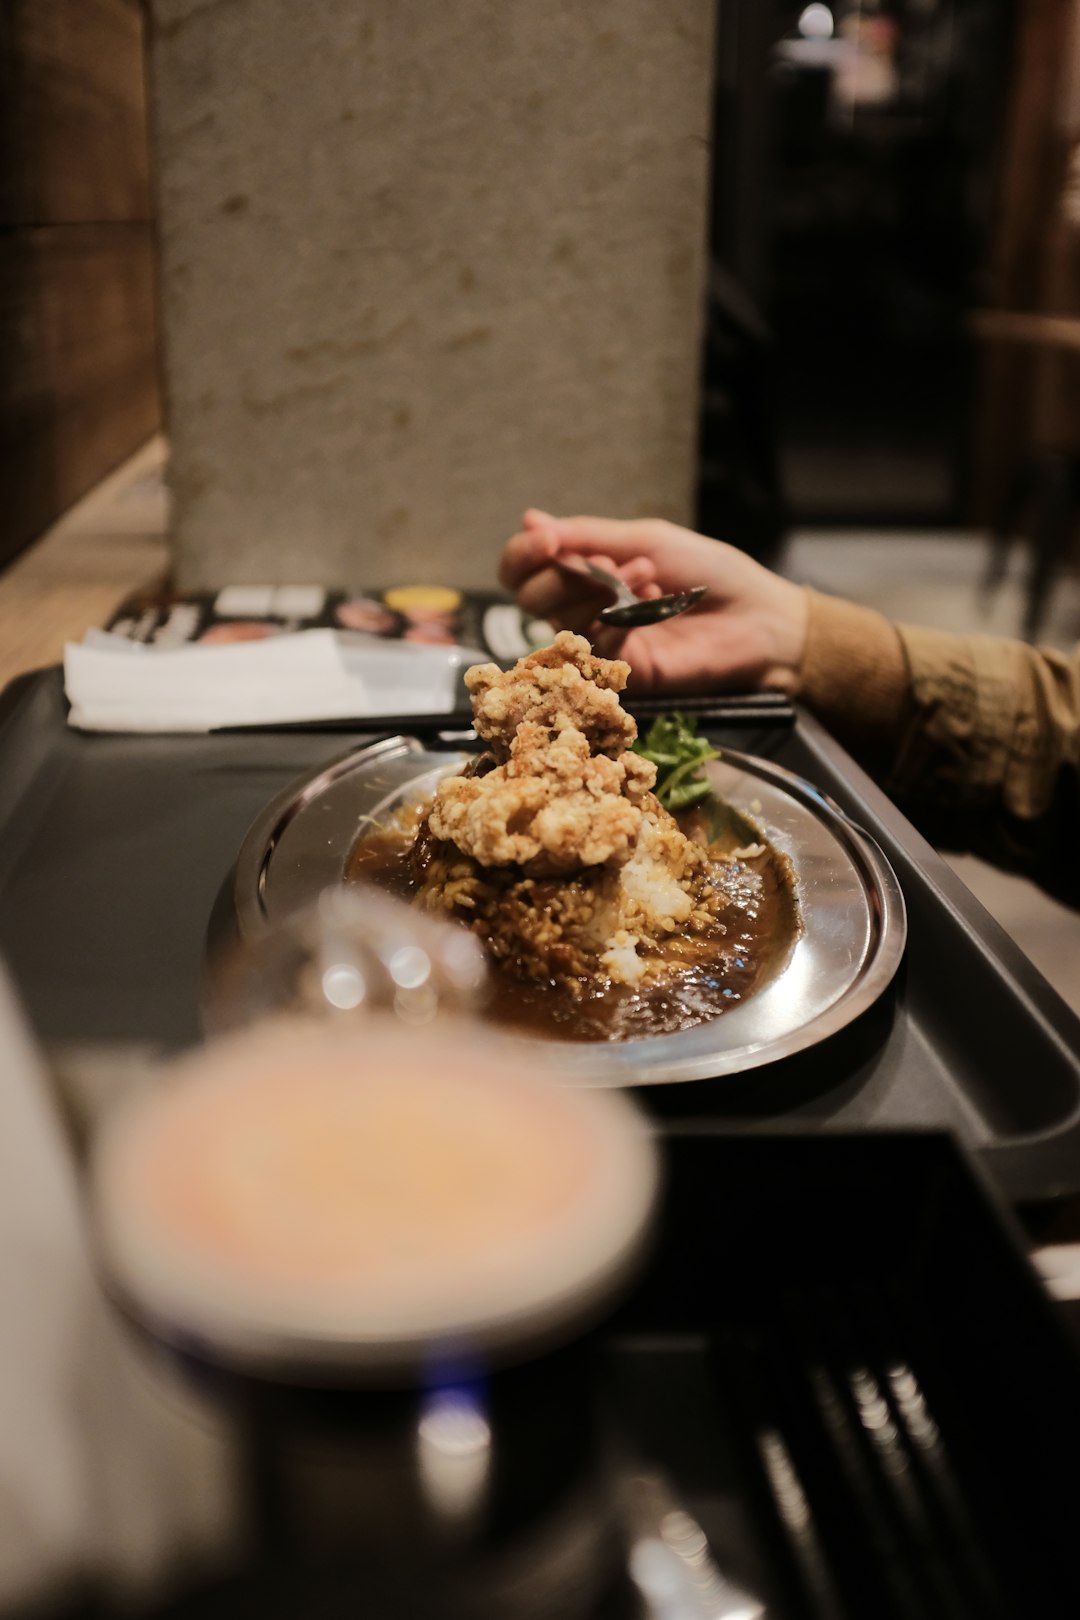 person holding stainless steel tray with food